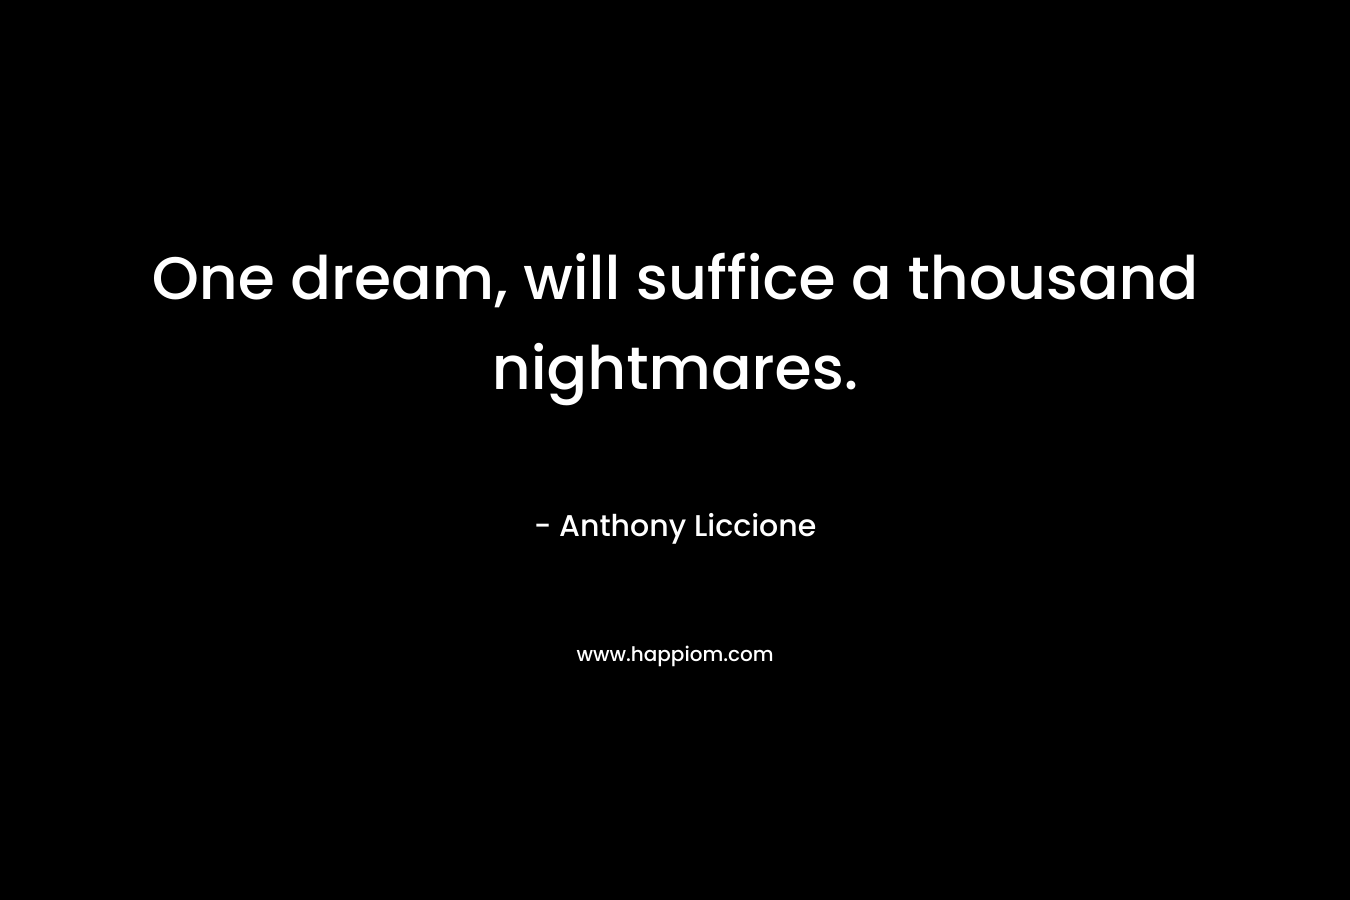 One dream, will suffice a thousand nightmares.